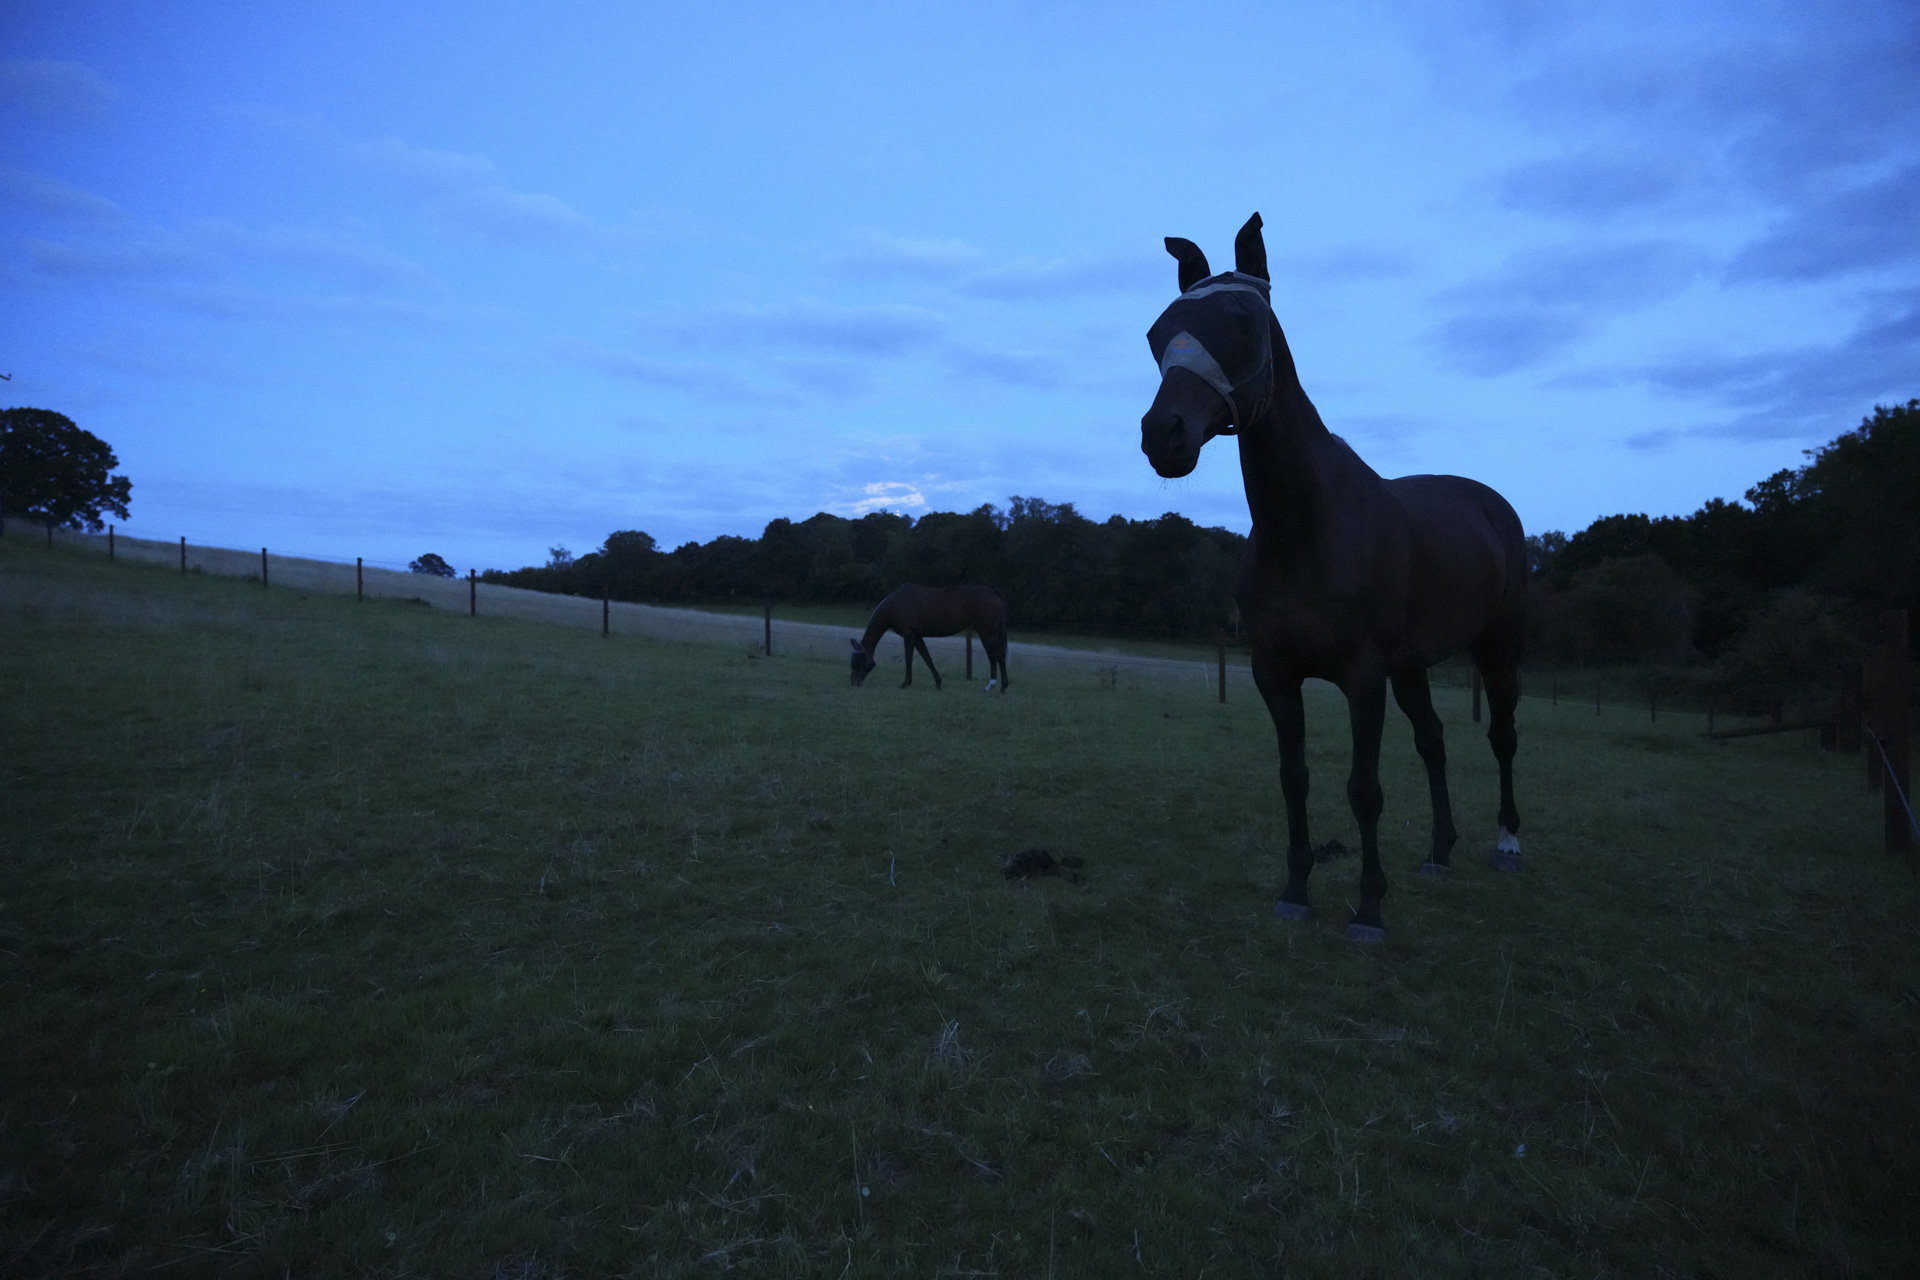 Horses at twilight, taken with the Sony FE 20-70mm F4 lens and A7C R